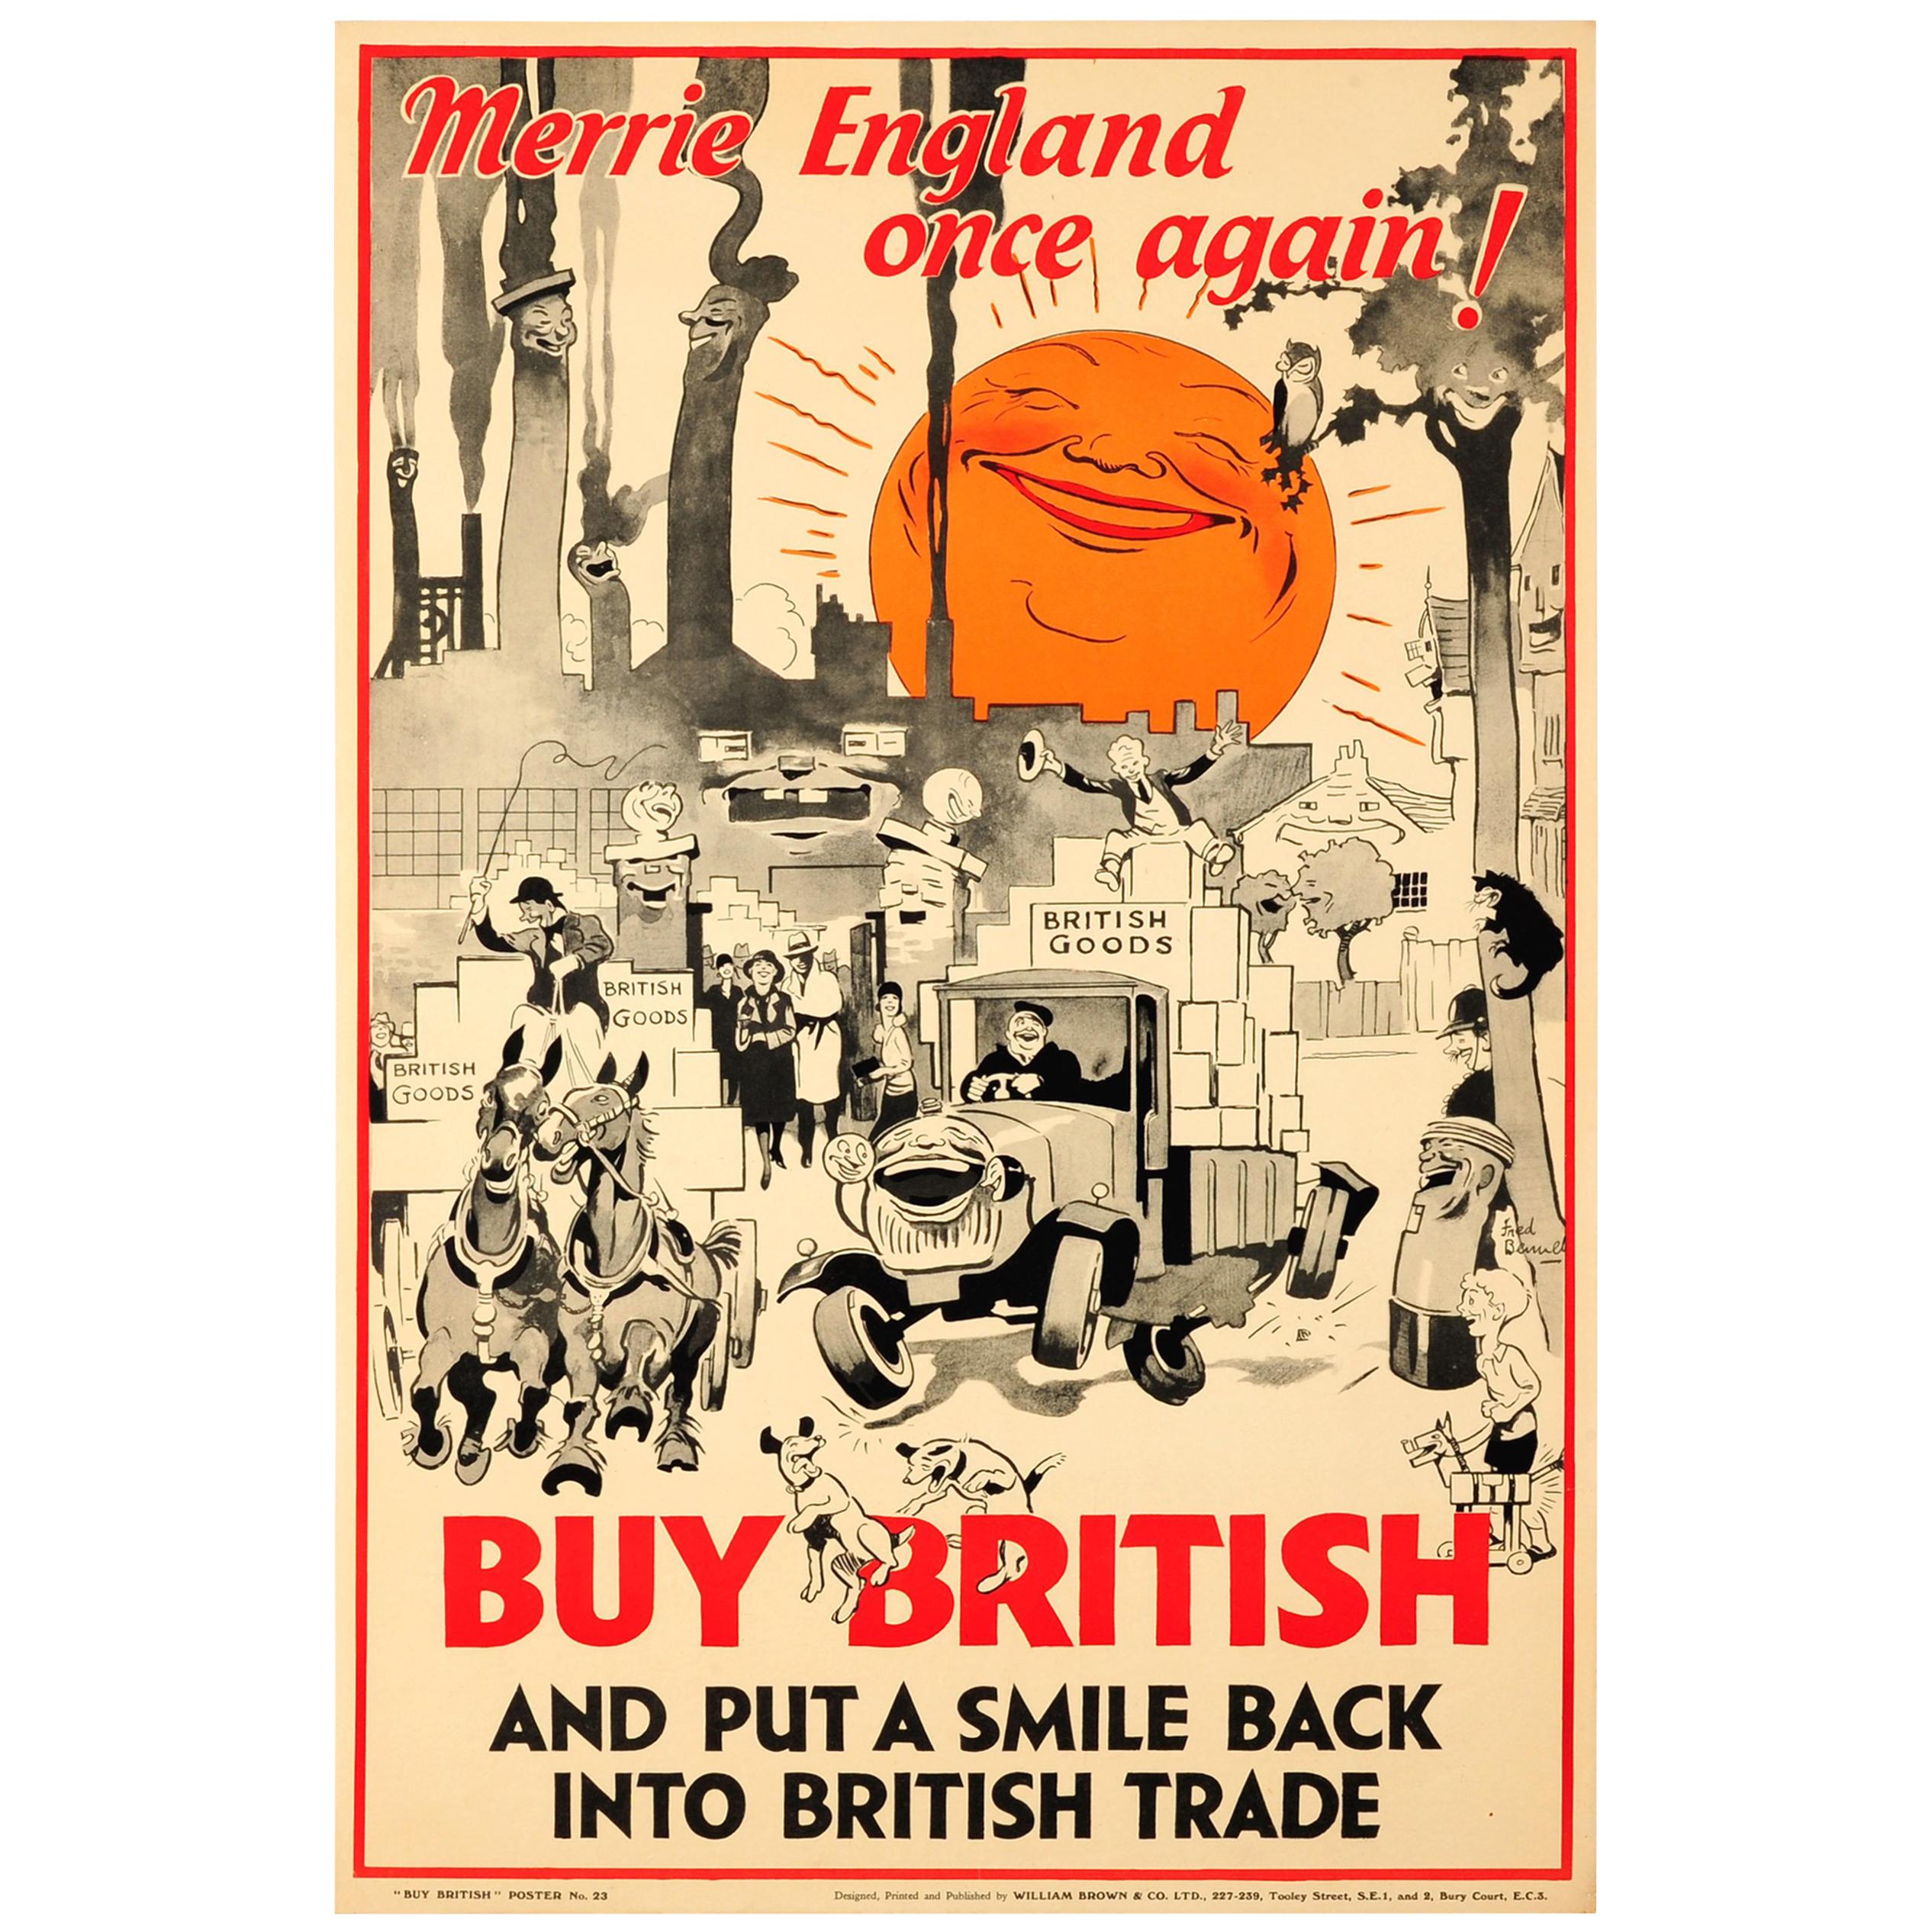 Original Vintage Buy British Poster - Merrie England Once Again! - British Trade For Sale